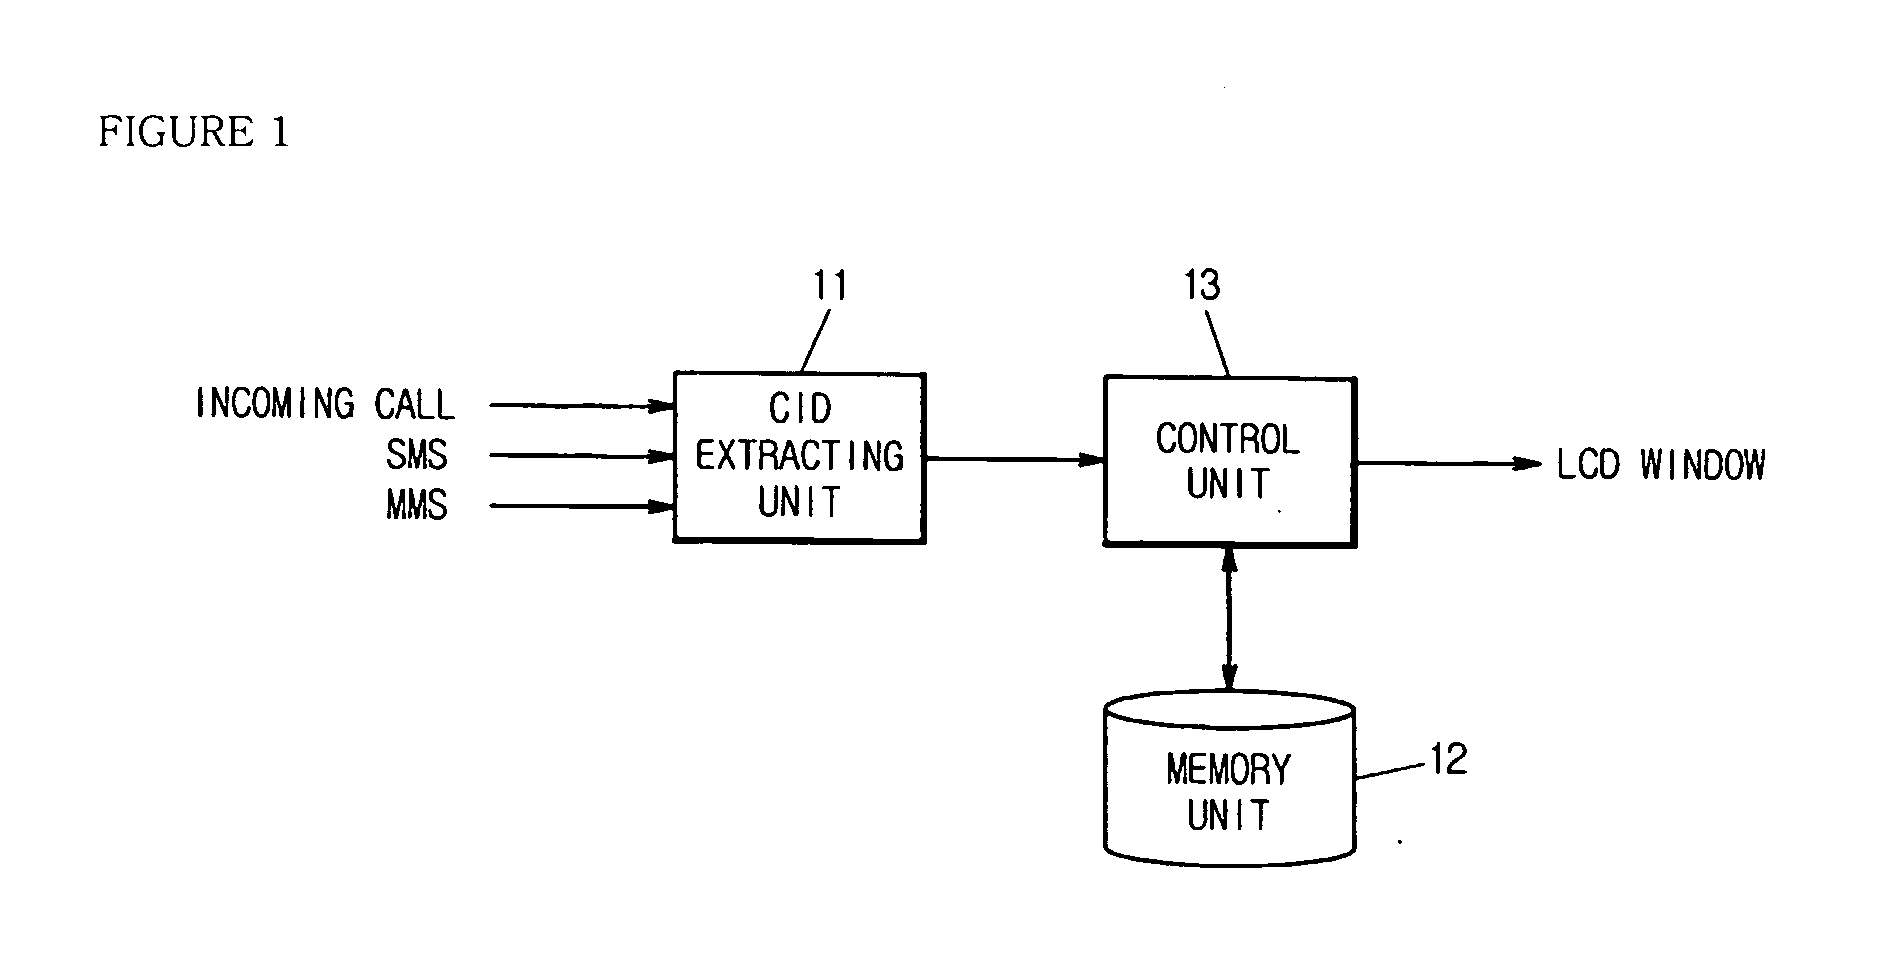 Method for reception and processing of incoming calls and messaging services in a mobile communication terminal based on relevant conditions